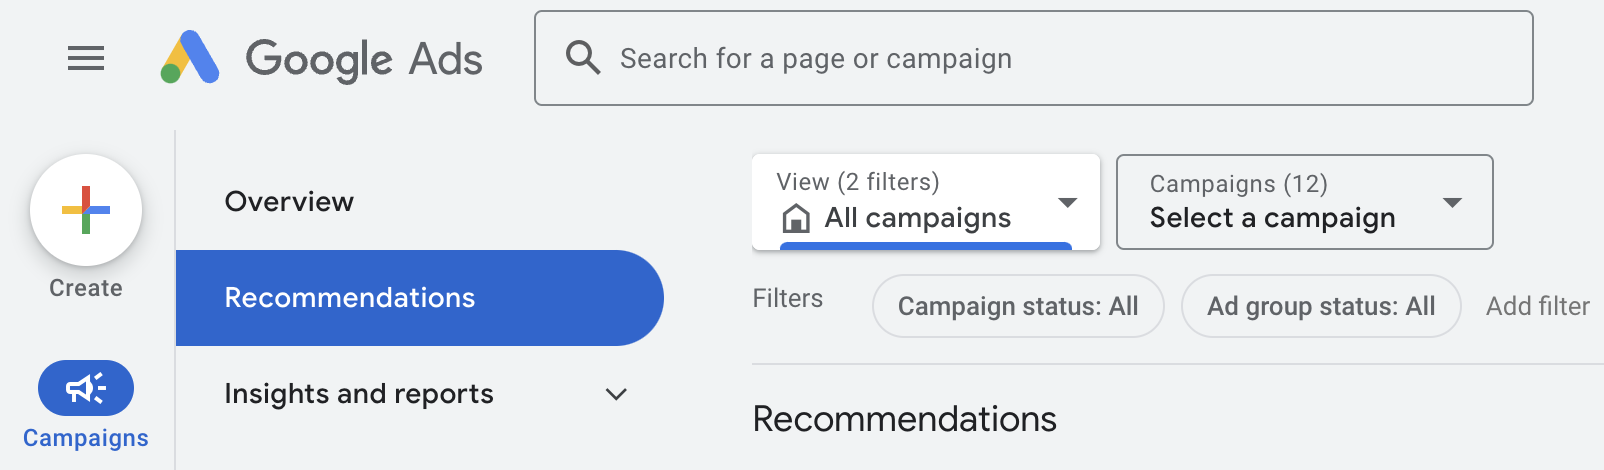 Recommendation Tab in Google Ads Interface